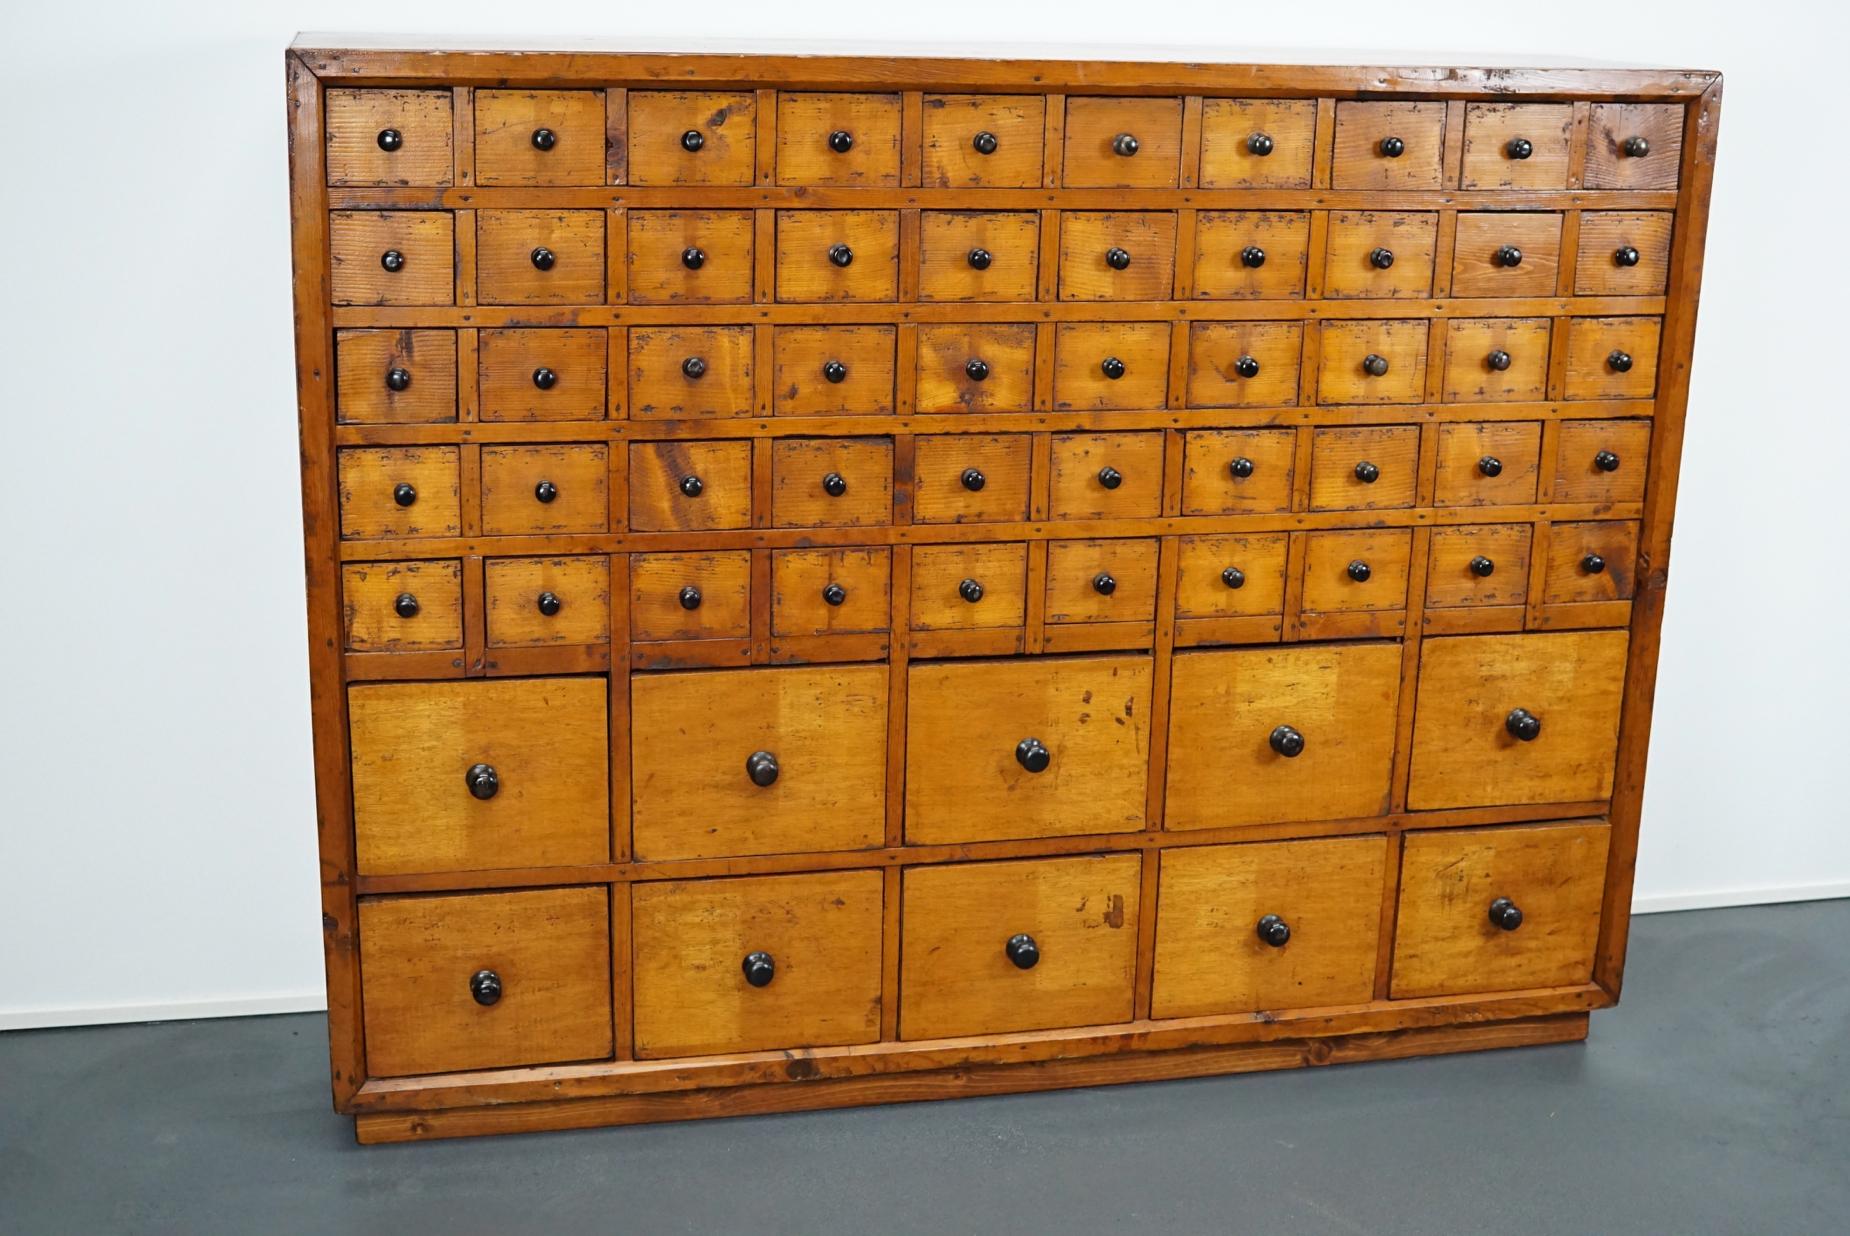 This apothecary cabinet was designed during the 1940s in the Netherlands. The piece features 60 drawers with iron hardware. It remains in a very good restored condition with signs of use and age.

The inside measurements of the drawers are: L 29 x